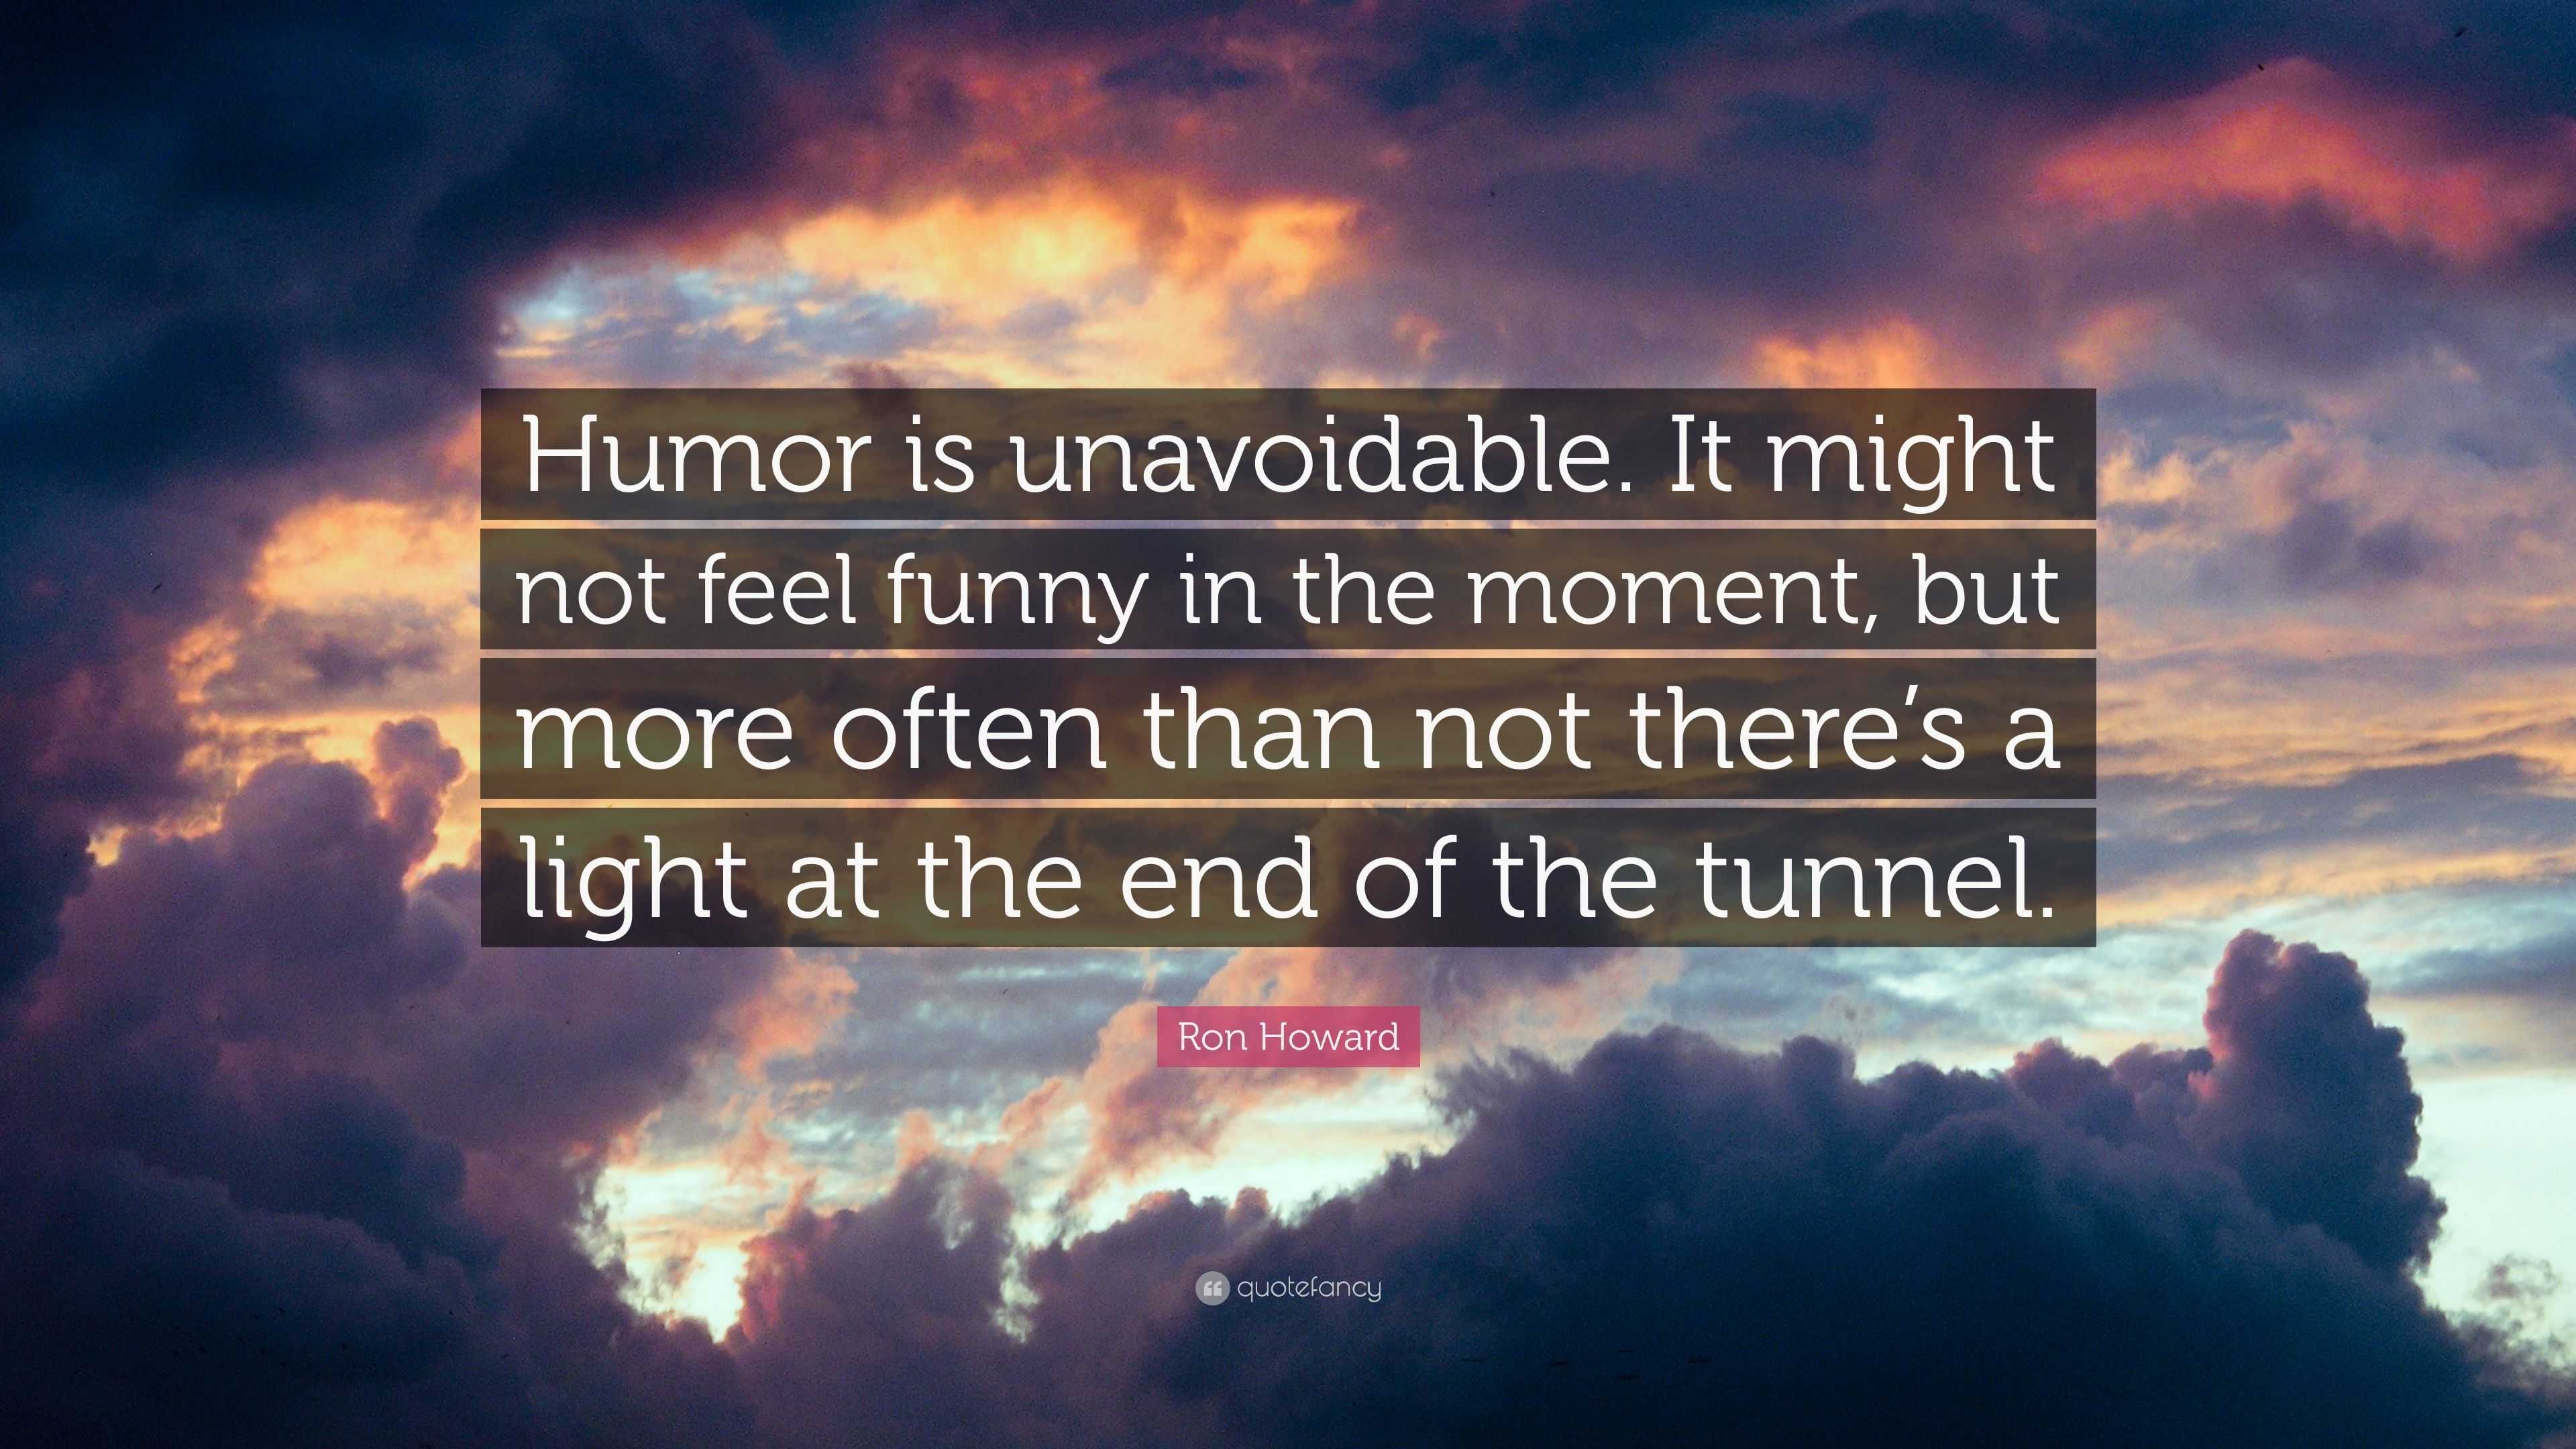 Ron Howard Quote: “Humor is unavoidable. It might not feel funny in the  moment, but more often than not there's a light at the end of the t...”